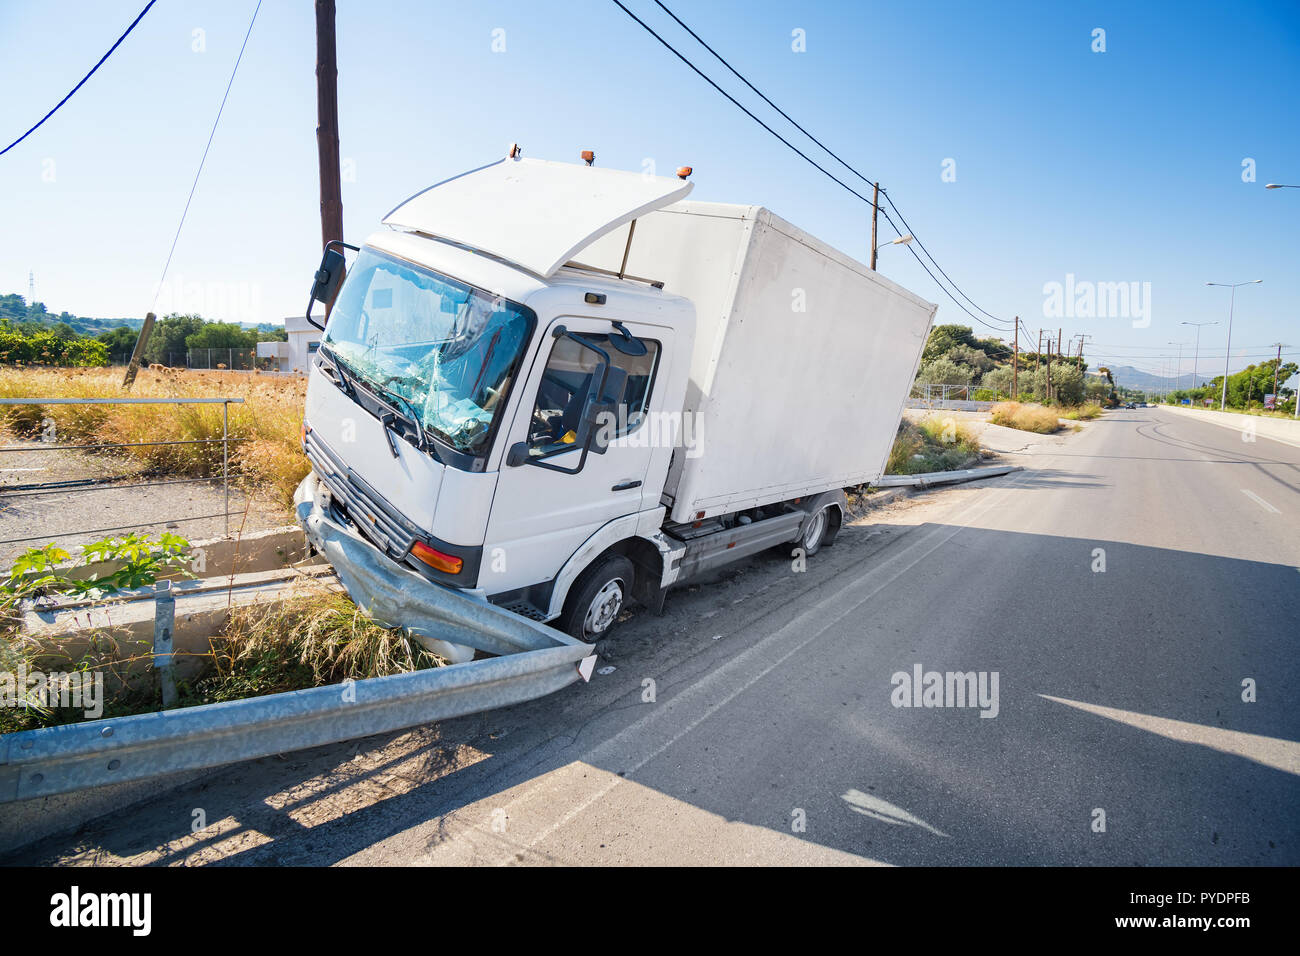 Crashed truck that hit crashed barrier on road, broken windshield, sunny day Stock Photo